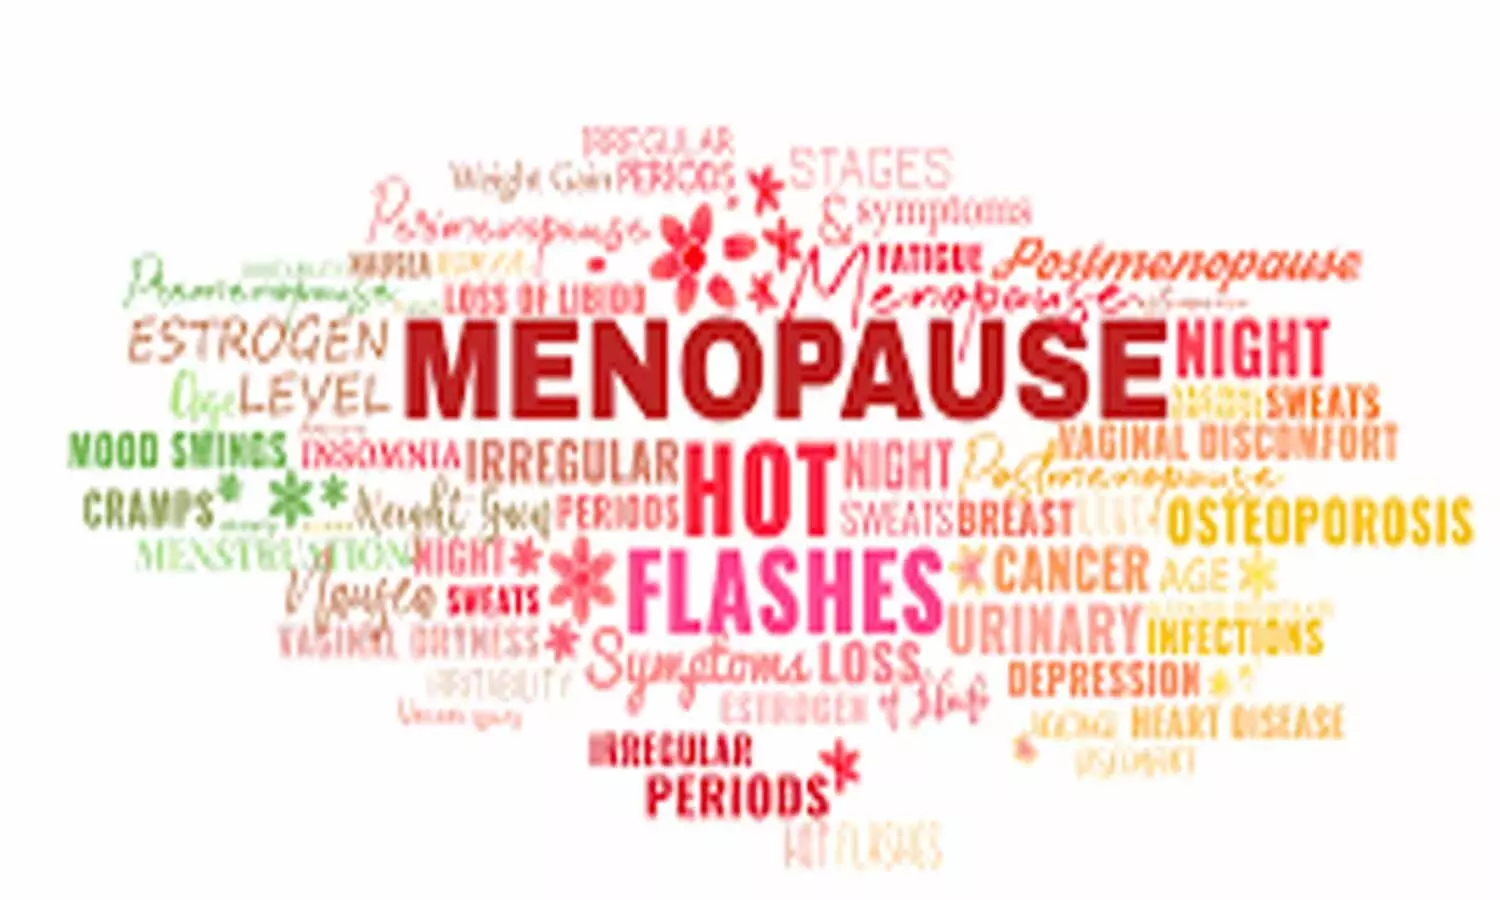 Menopause increases risk of metabolic syndrome, finds study